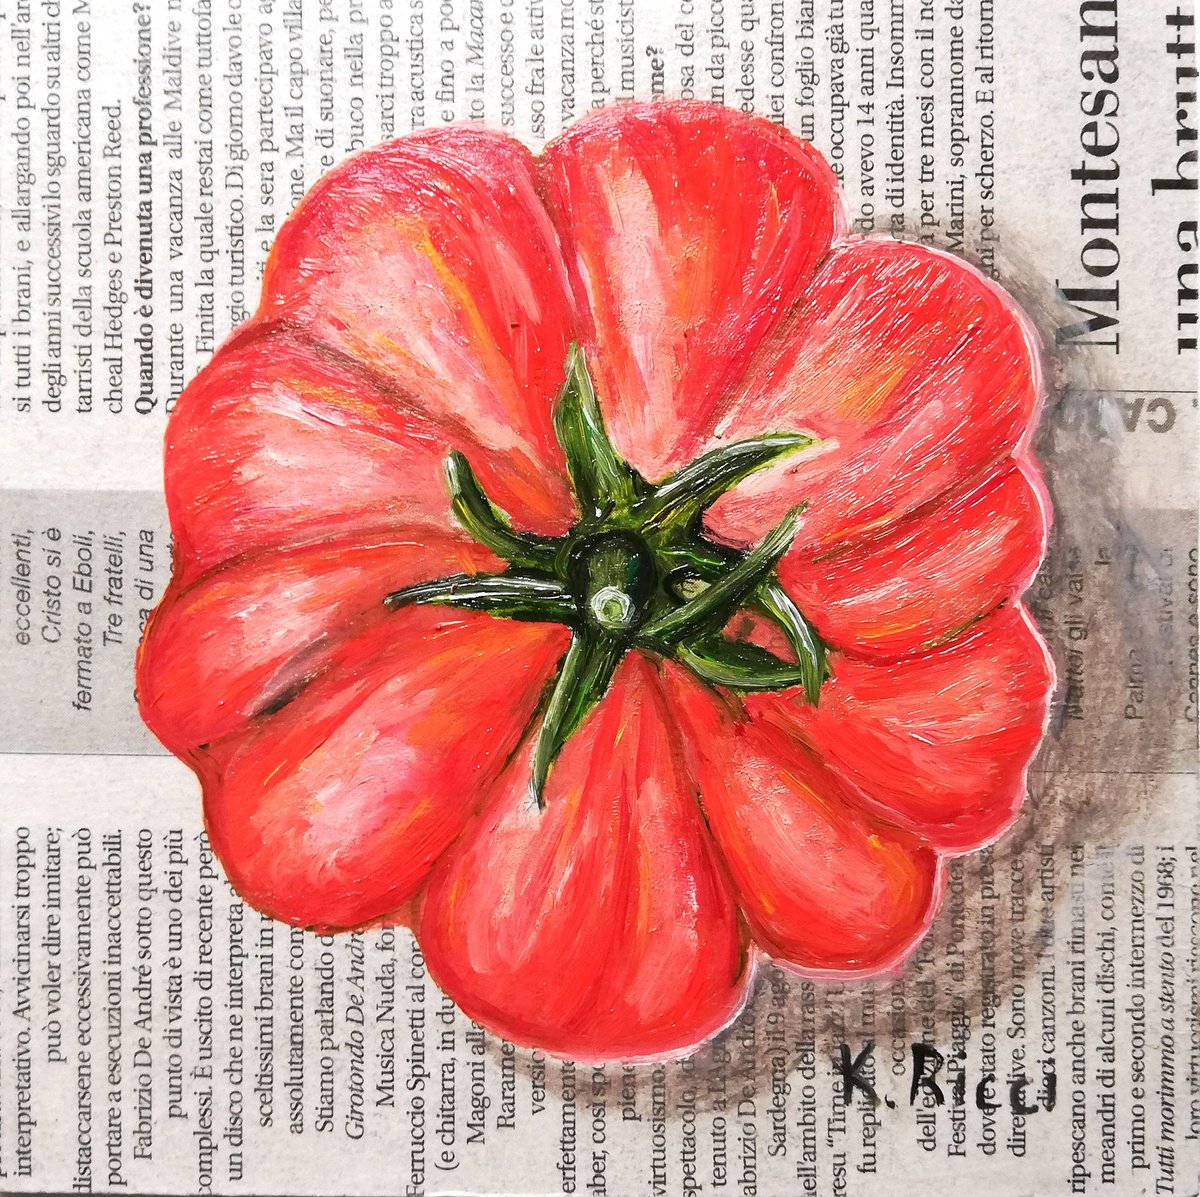 Tomato on Newspaper Original Oil on Wooden Board Painting 6 by 6 inches (15x15 cm) by Katia Ricci